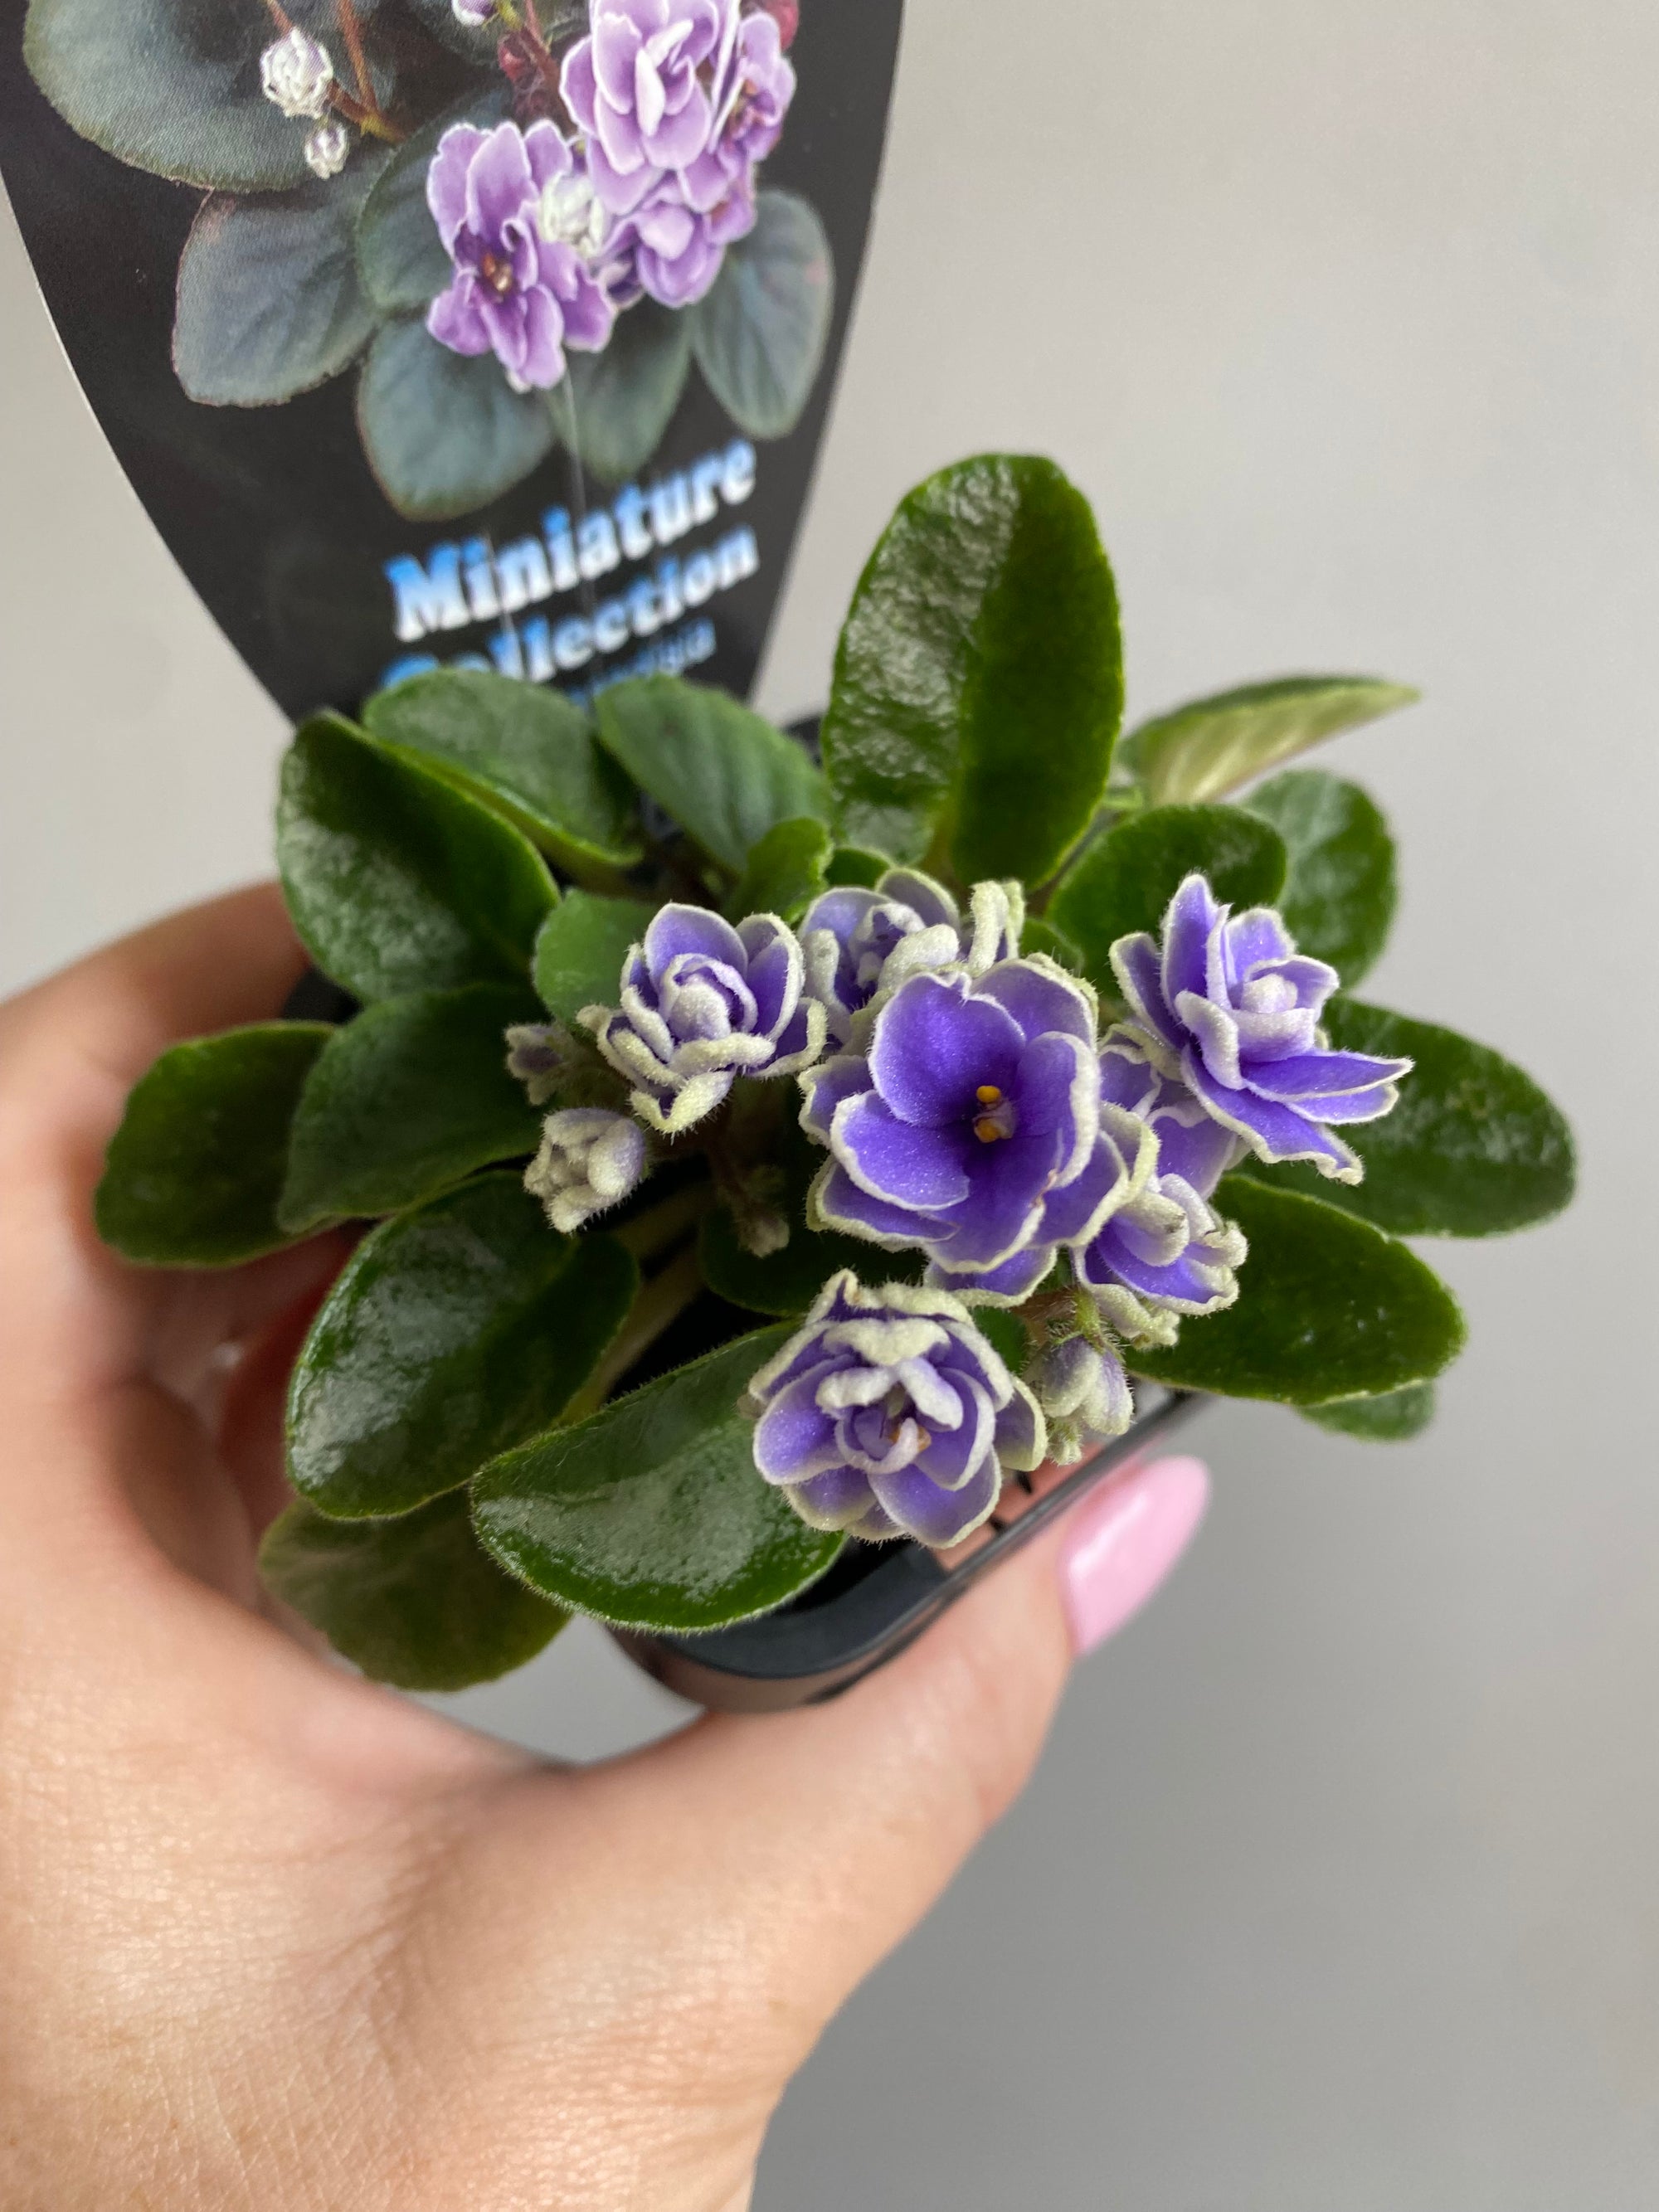 African Violet - China Doll Blue